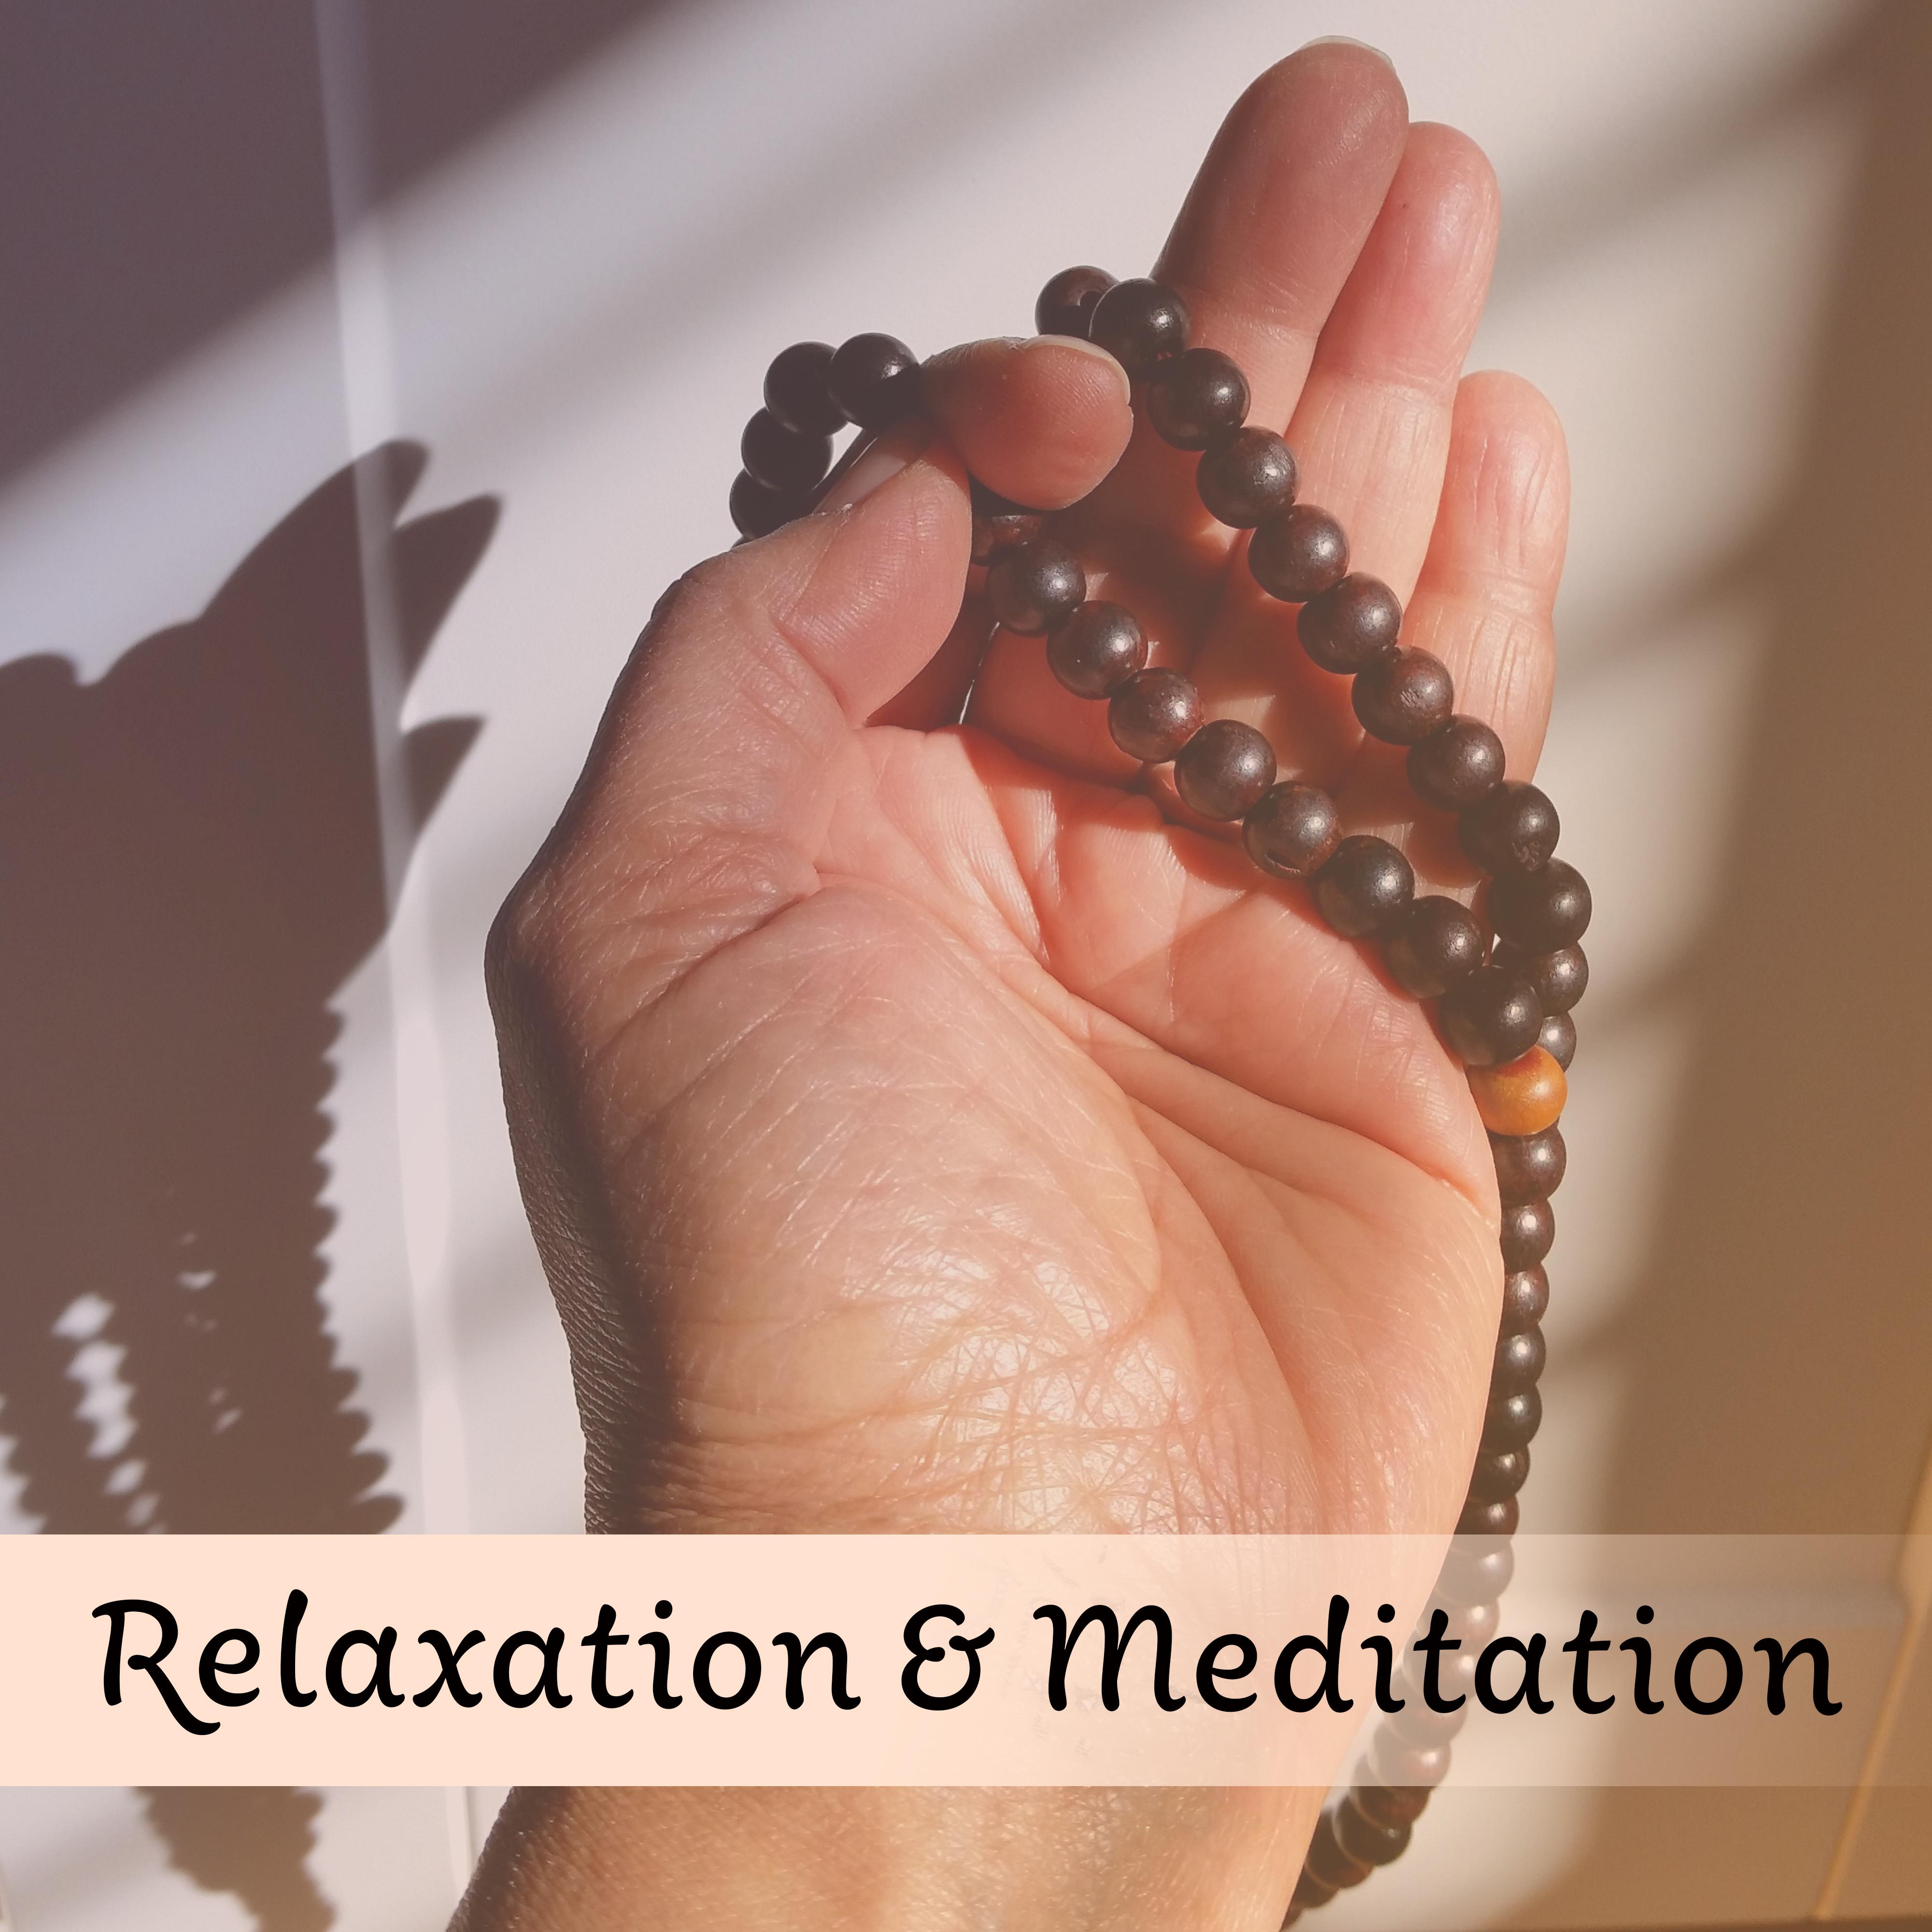 Relaxation  Meditation  New Age, Sounds of Nature, Relaxing Music, Yoga, Rest, Manage Stress